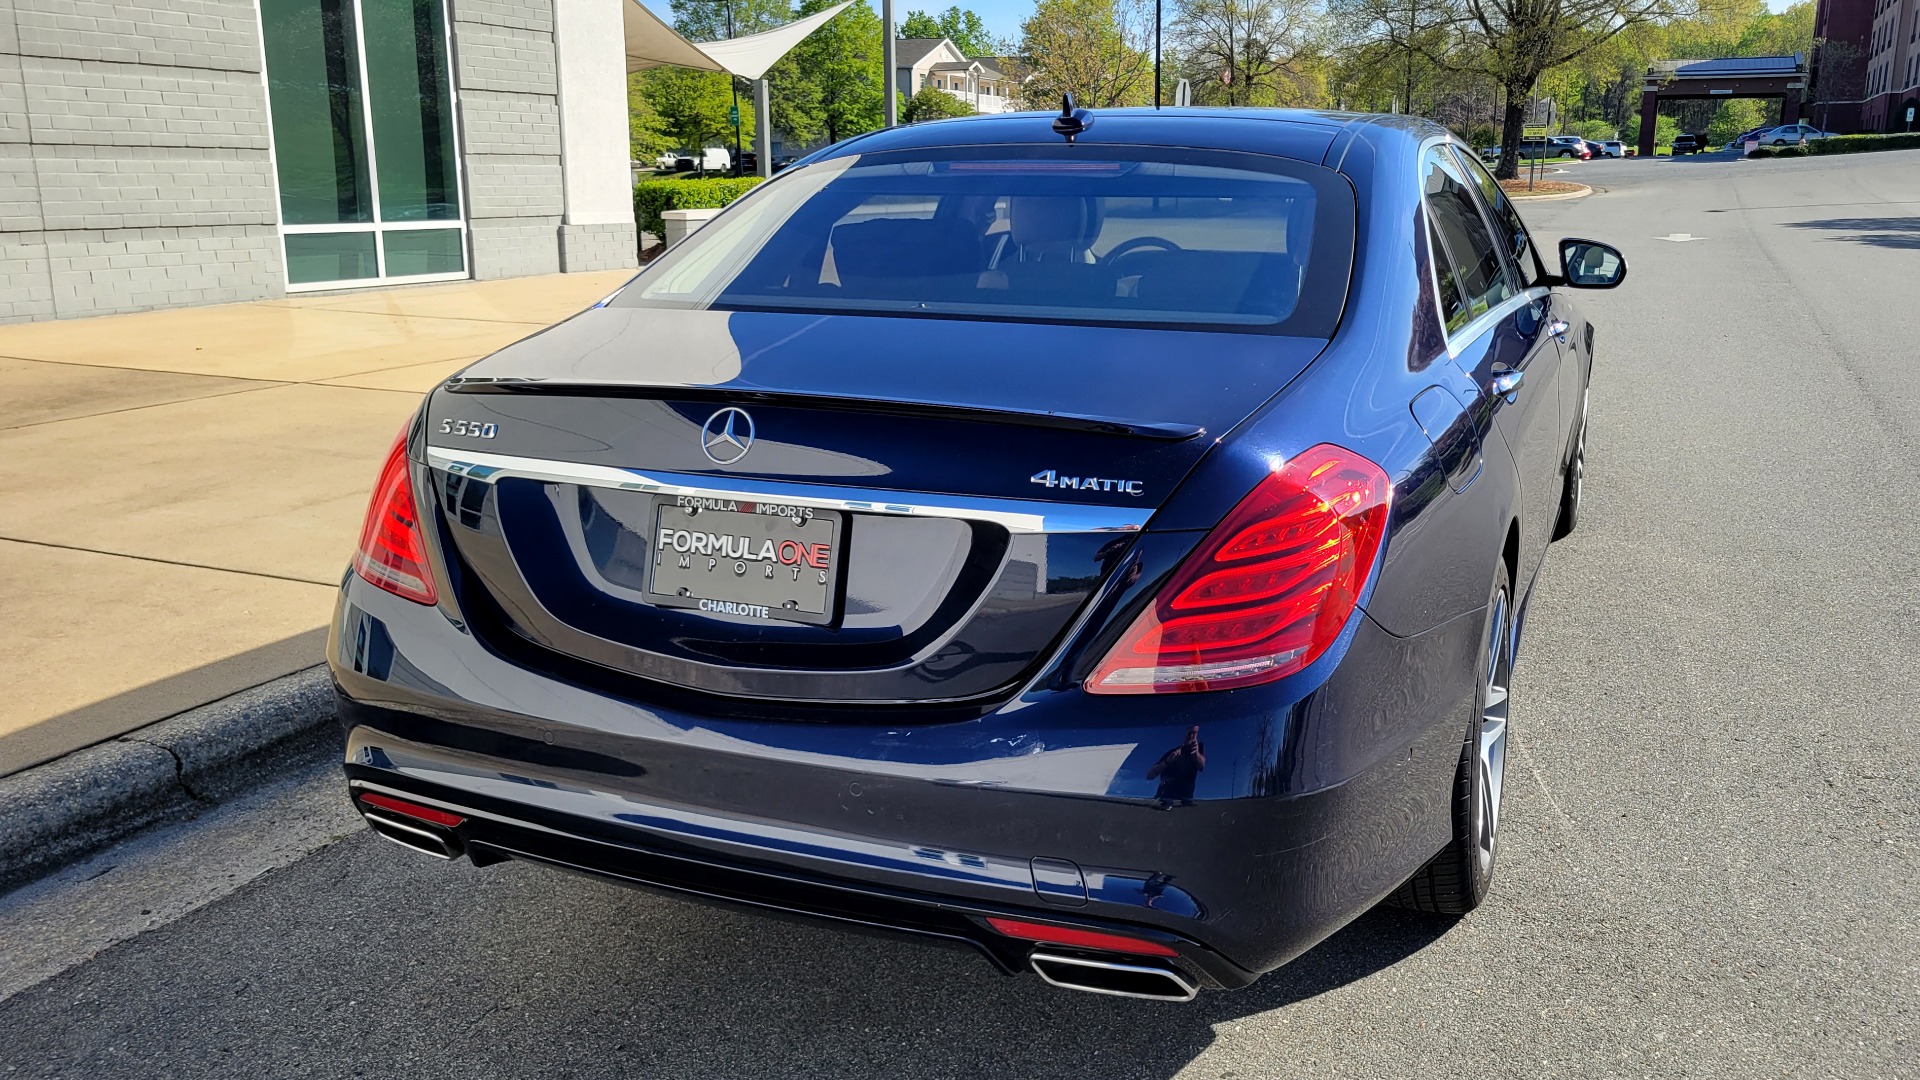 Used 2015 Mercedes-Benz S-CLASS S 550 4MATIC PREMIUM SPORT / WARMTH / DRVR ASST for sale $43,999 at Formula Imports in Charlotte NC 28227 9